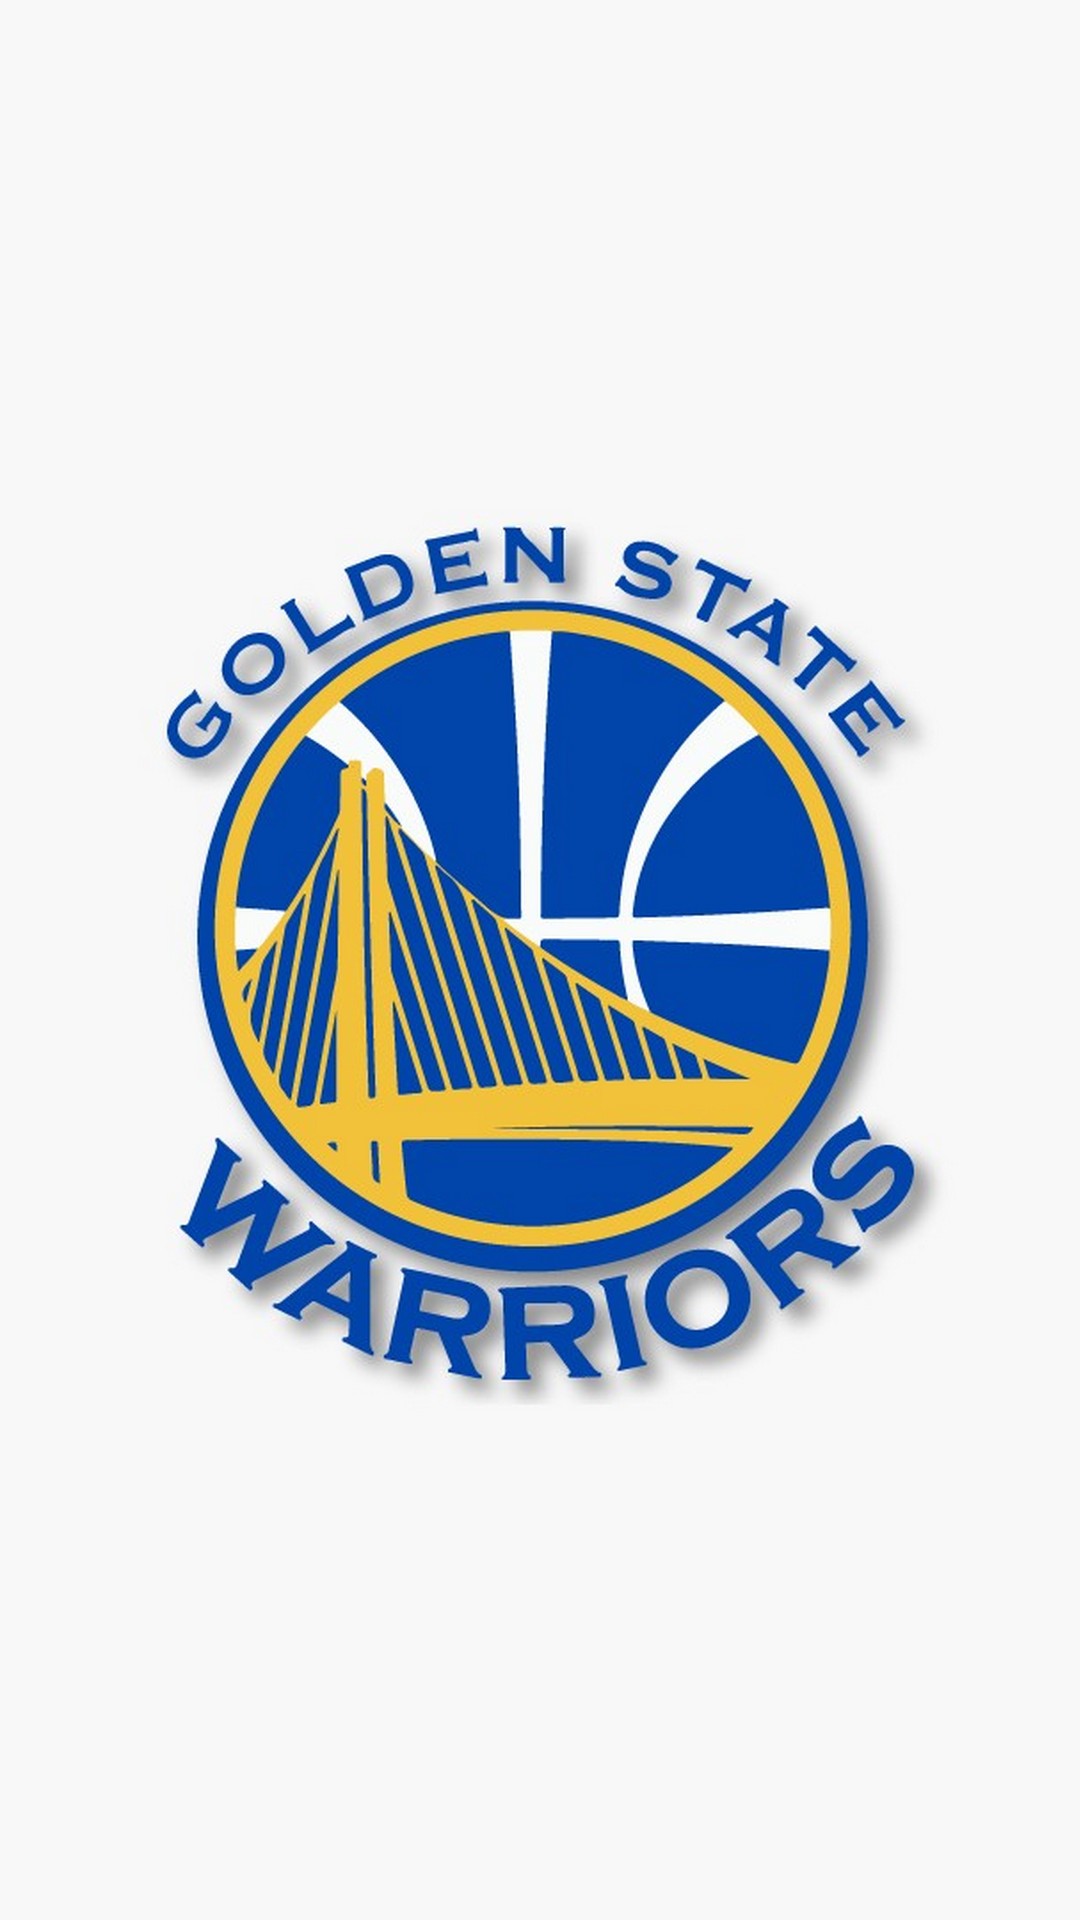 Golden State Warriors iPhone Wallpapers with image dimensions 1080x1920 pixel. You can make this wallpaper for your Desktop Computer Backgrounds, Windows or Mac Screensavers, iPhone Lock screen, Tablet or Android and another Mobile Phone device